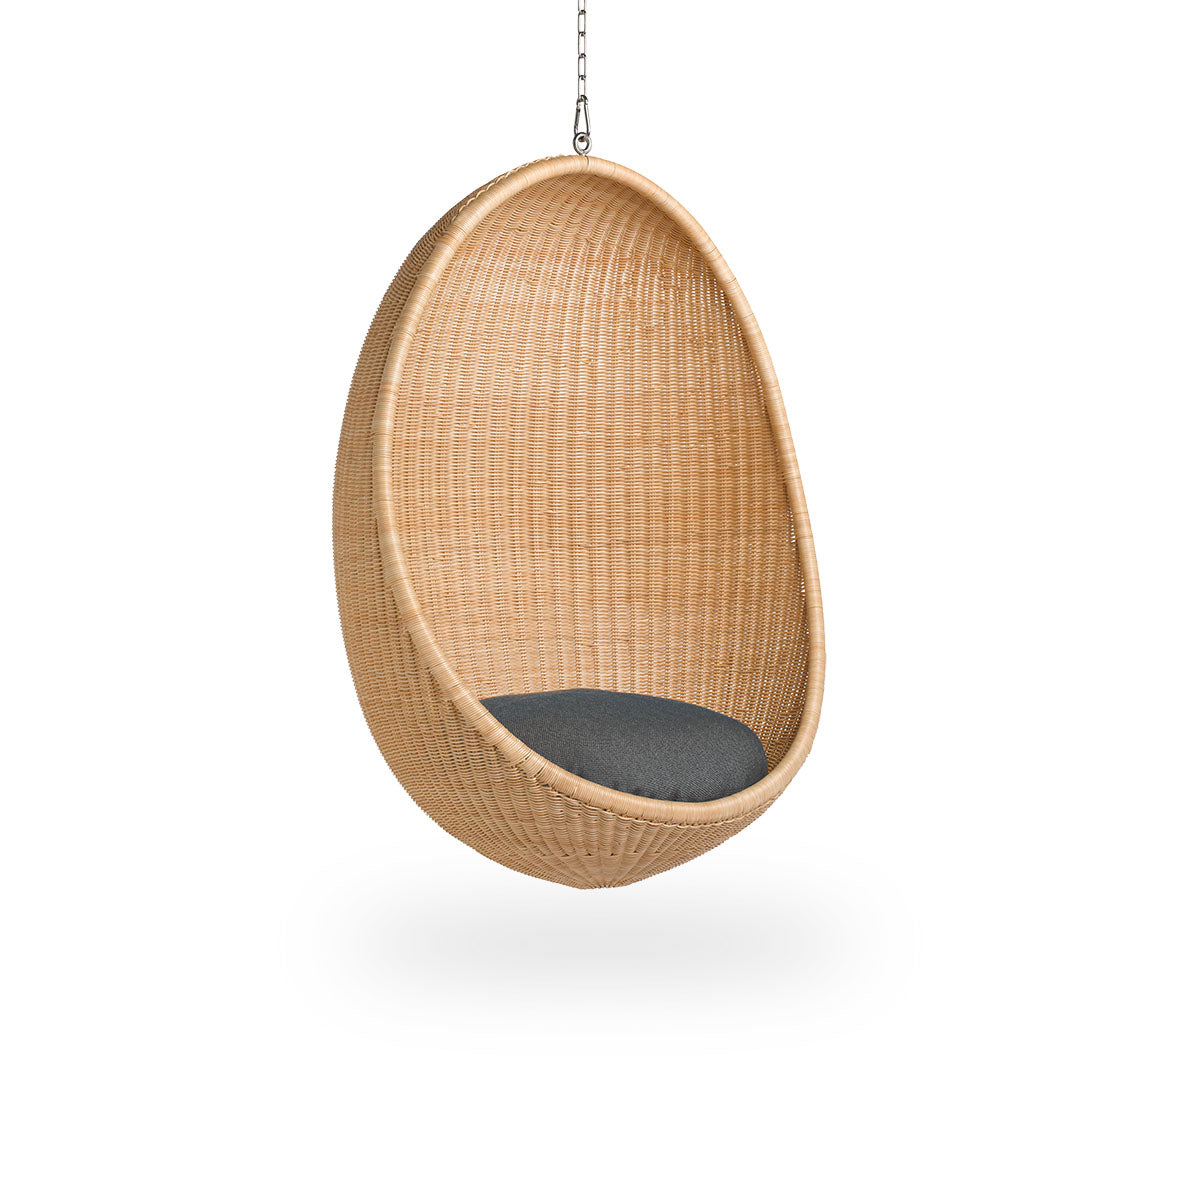 Hanging Egg Chair